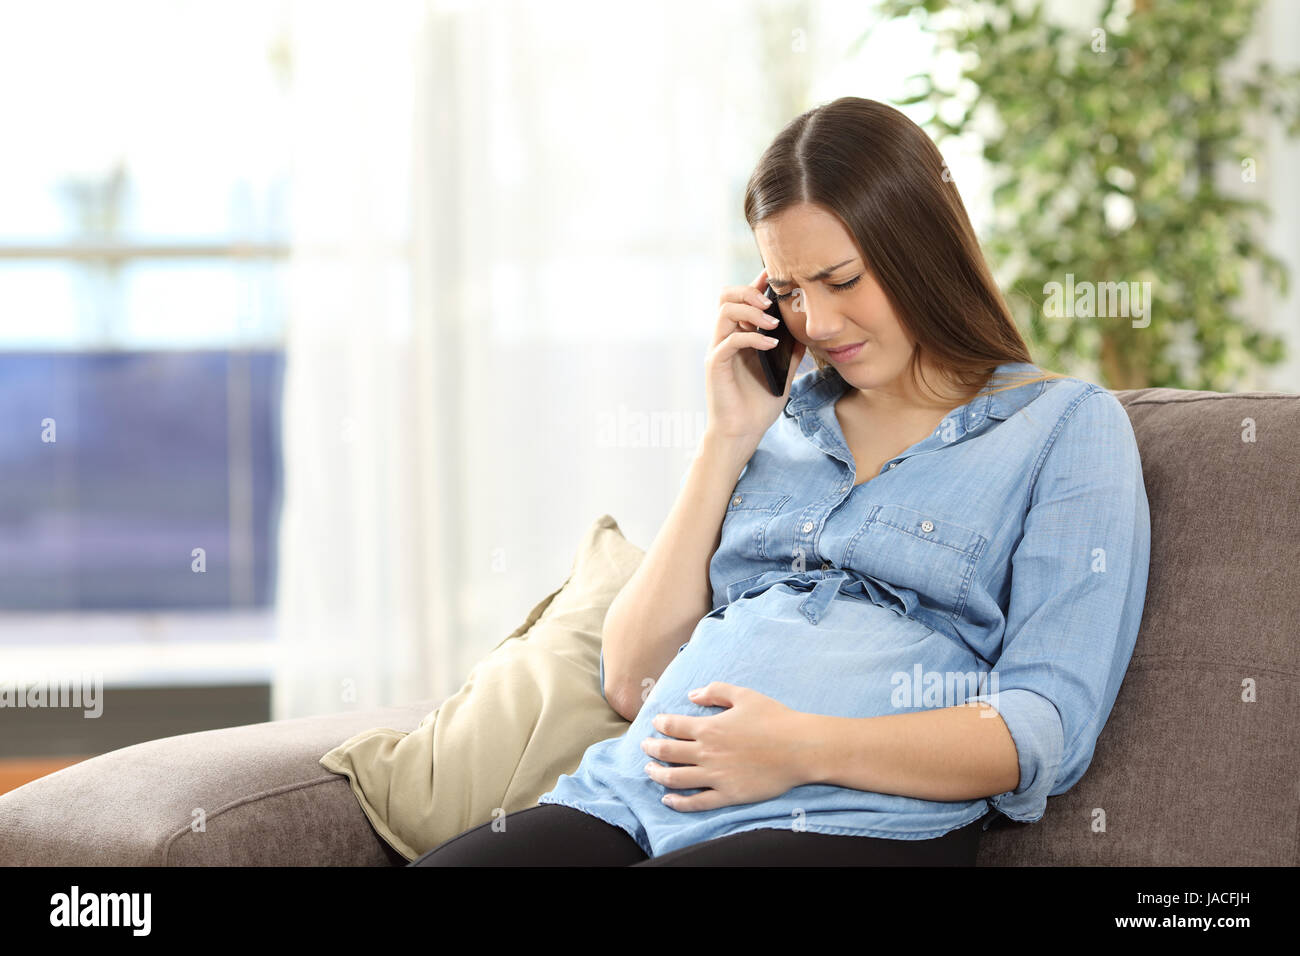 Young pregnant woman suffering belly ache and calling on the phone sitting on a couch in the living room in a house interior Stock Photo